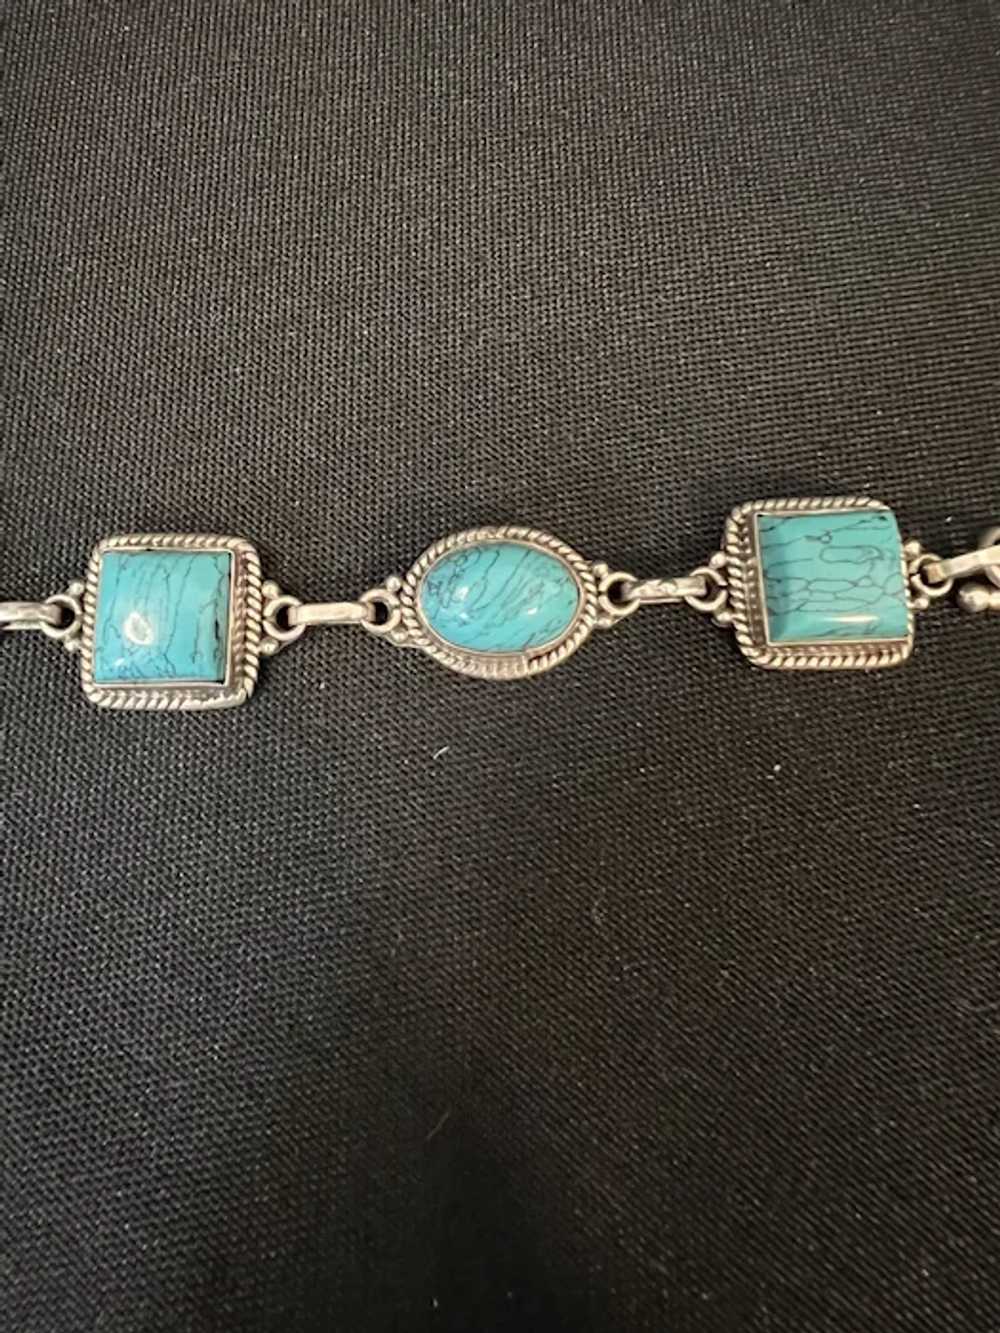 925 Sterling Silver and Turquoise Bracelet - image 3